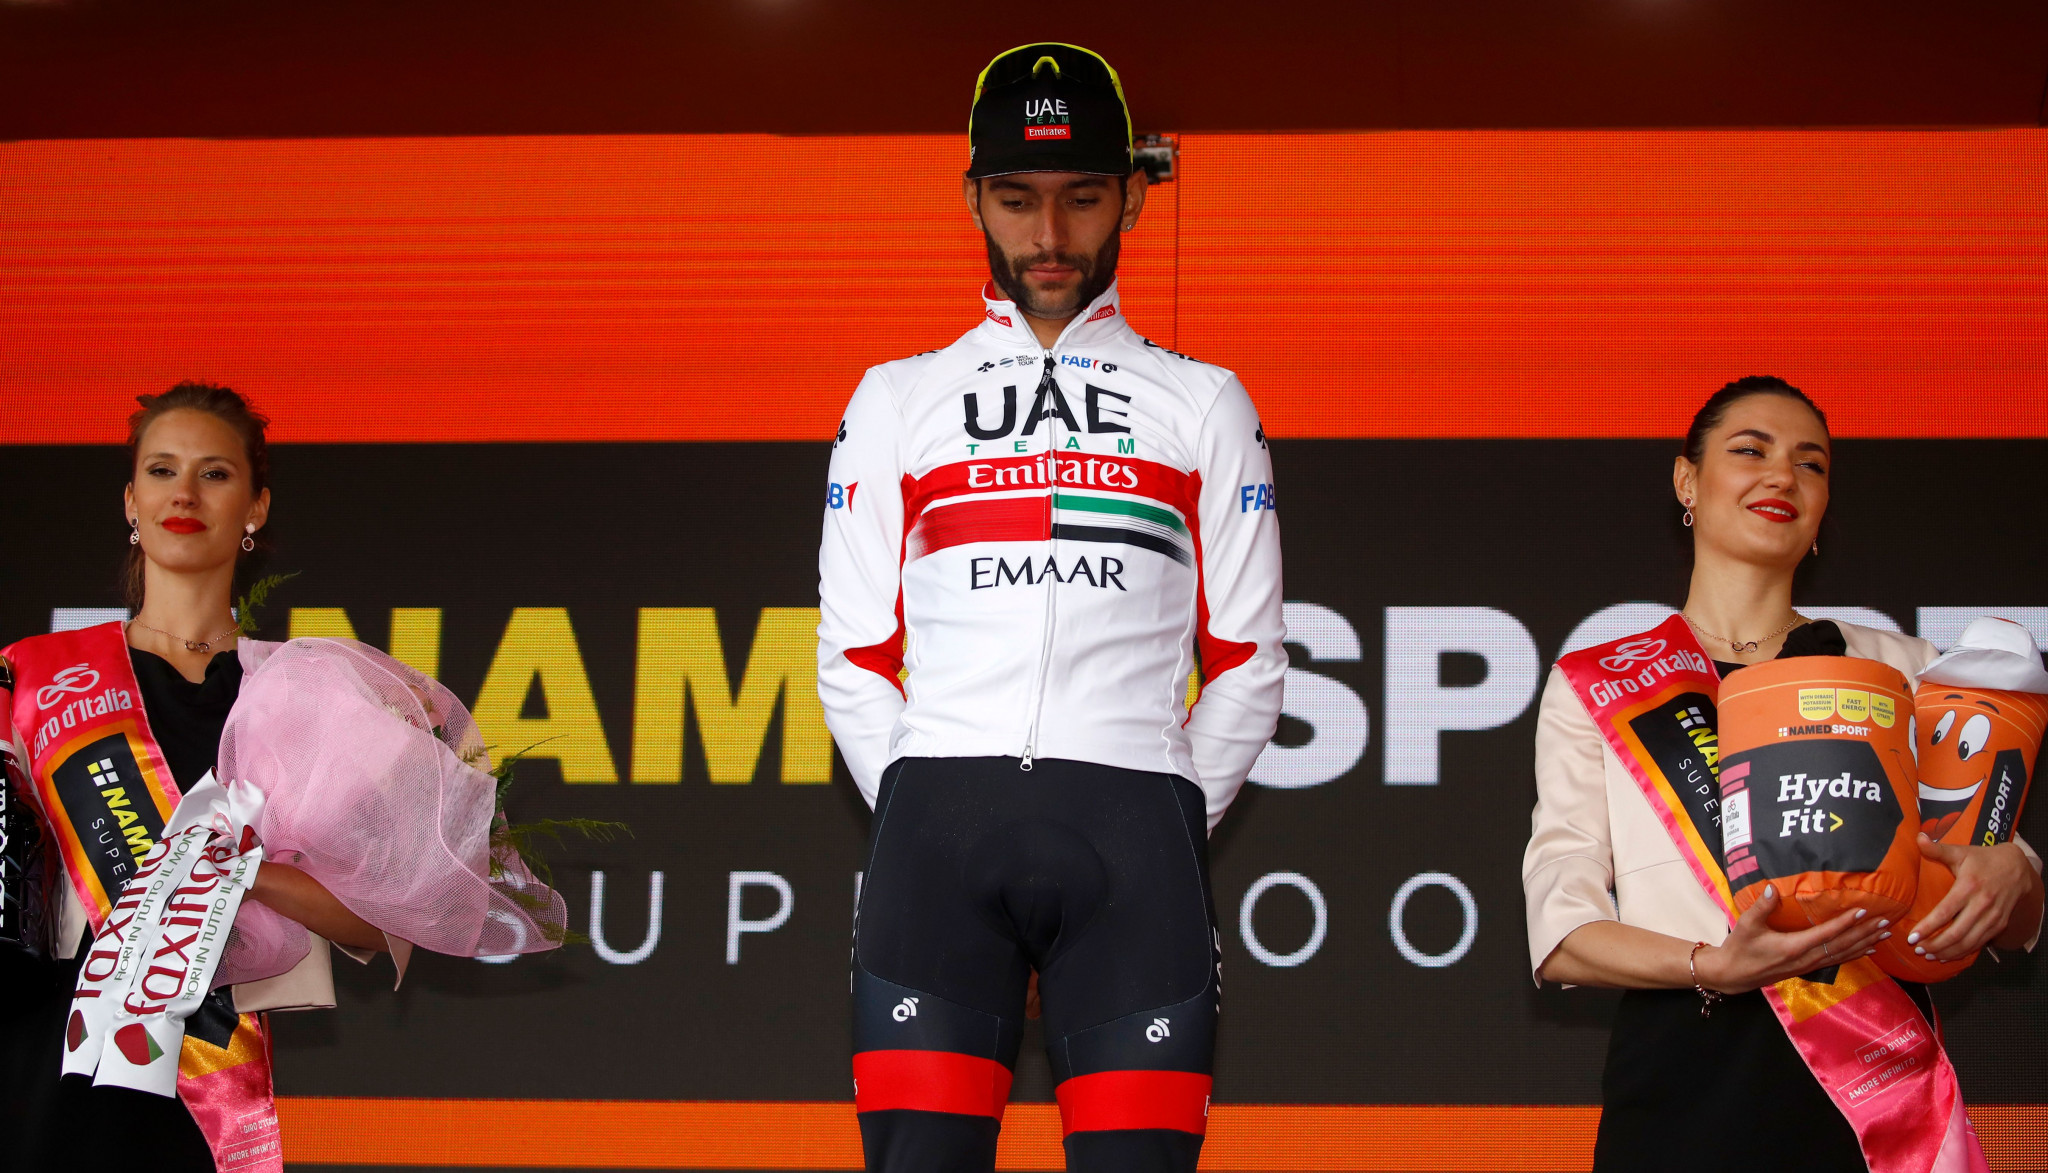 Colombia's Fernando Gaviria was awarded victory on stage three of the Giro d’Italia after home rider Elia Viviani was relegated by the jury ©Getty Images